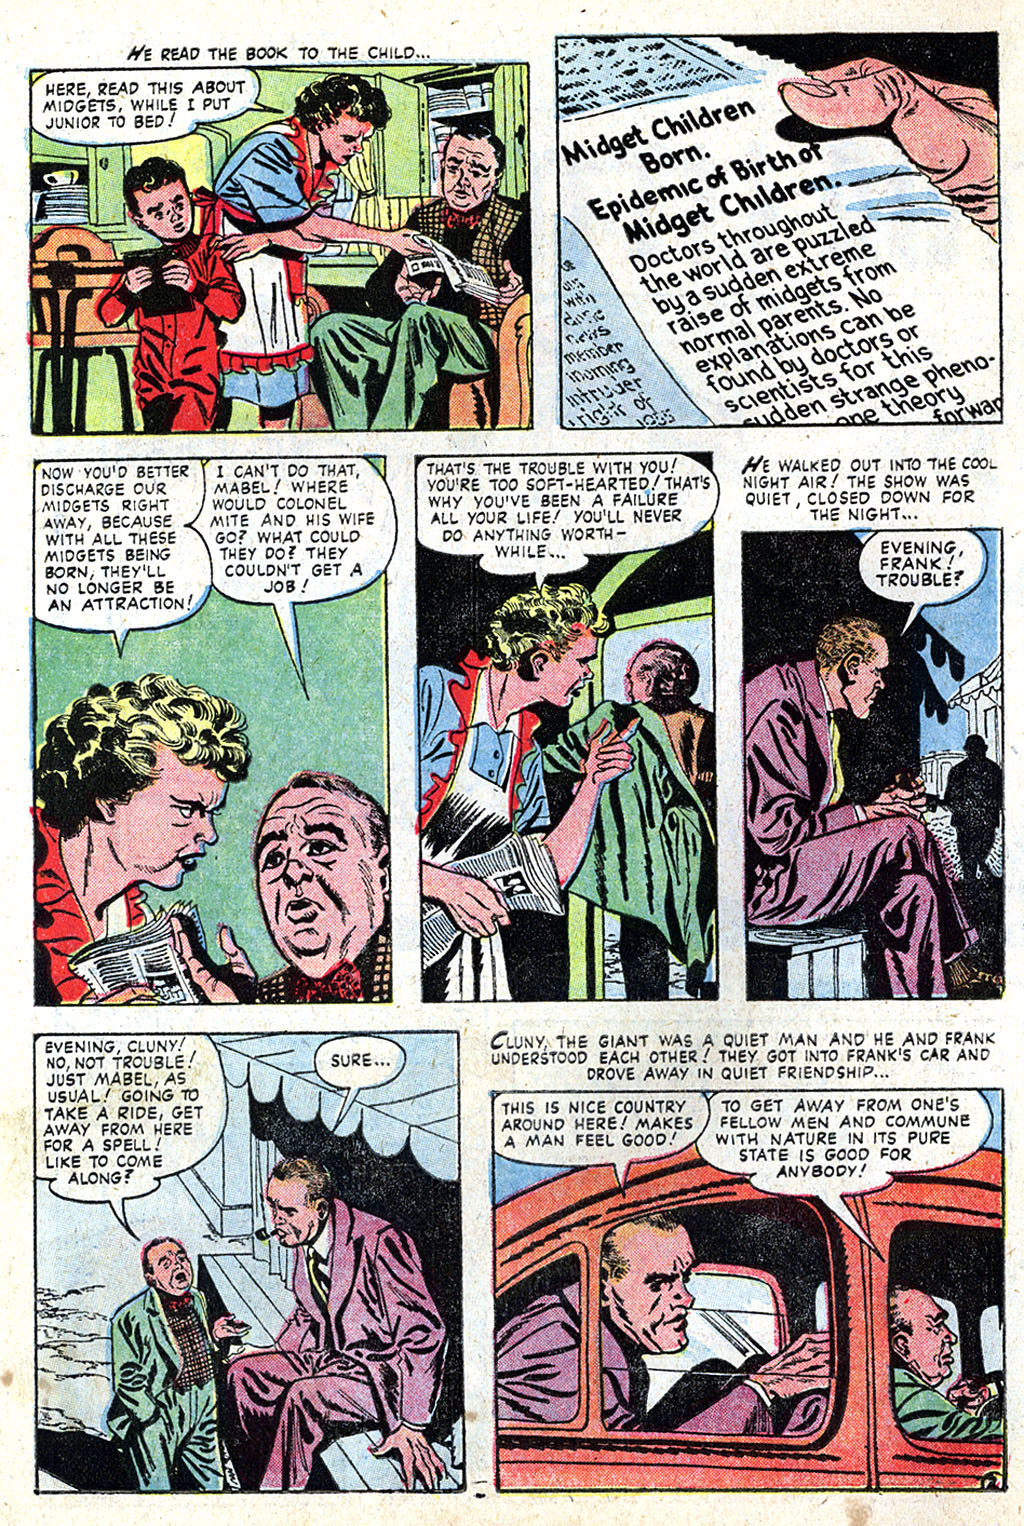 Marvel Tales (1949) 138 Page 13